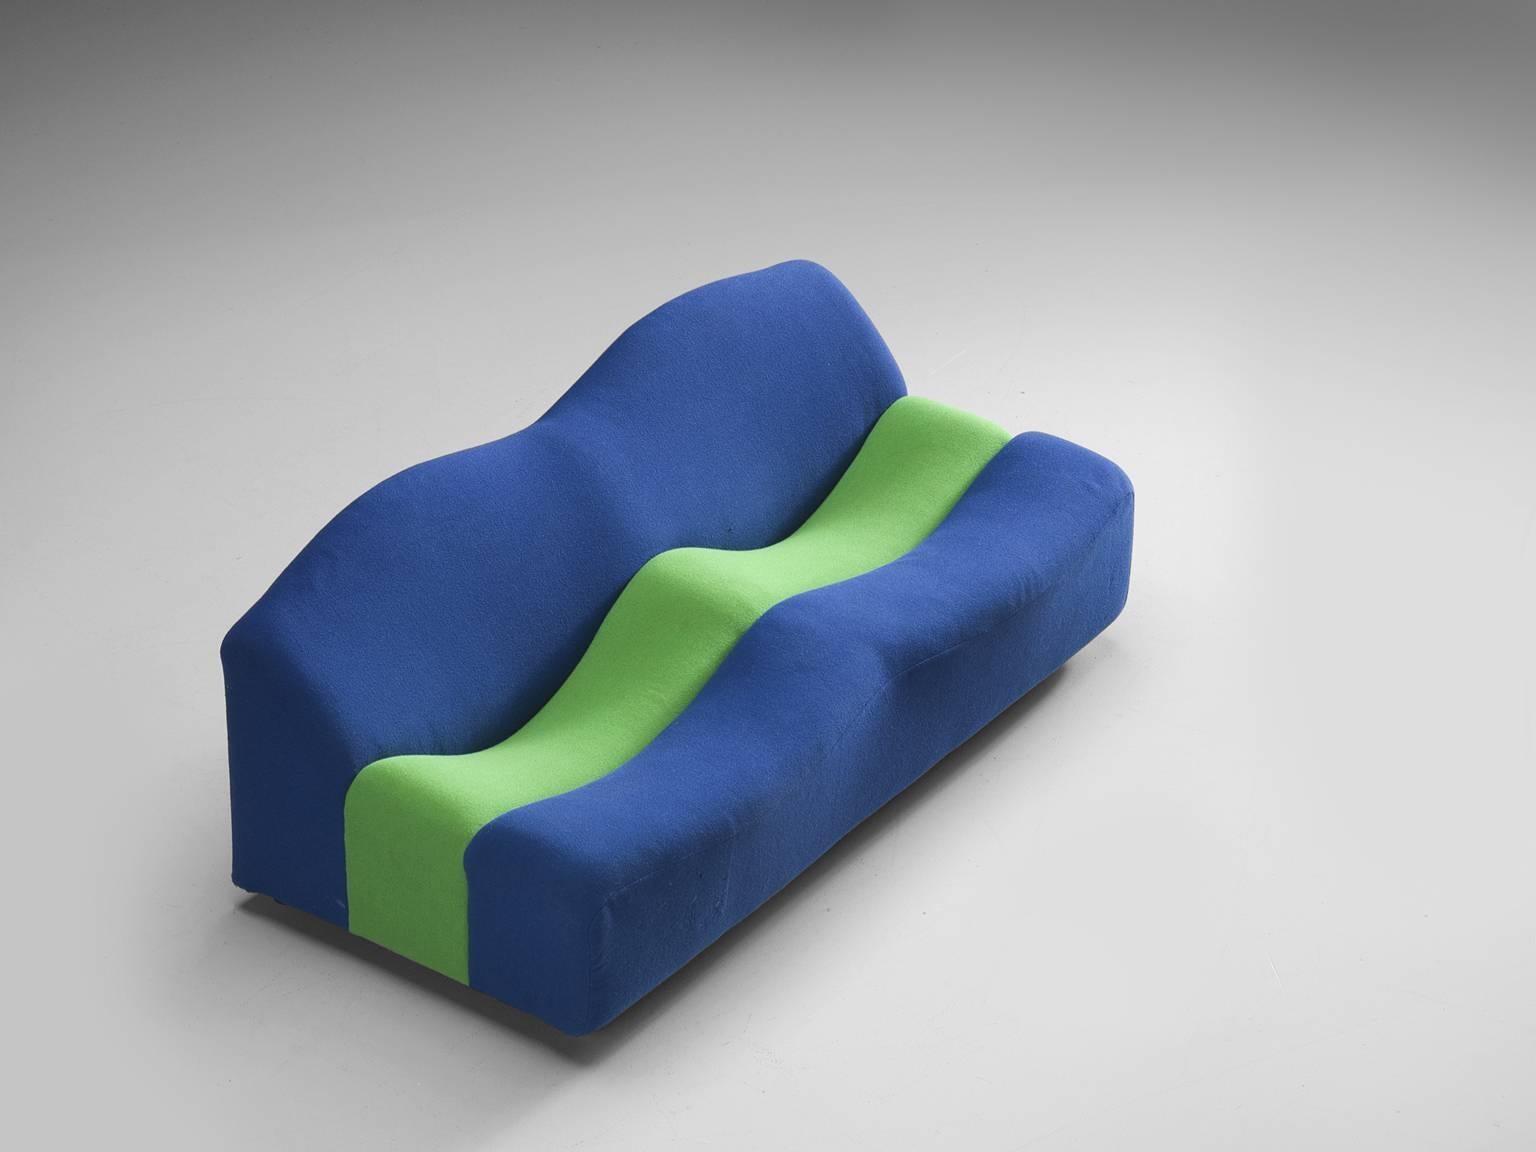 Two-seat settee from the ABCD series, in blue and green fabric, wood and metal, by Pierre Paulin for Artifort, the Netherlands, circa 1968.

Early edition three-seat sofa from the ABCD series of Pierre Paulin for Artifort. The shape of these